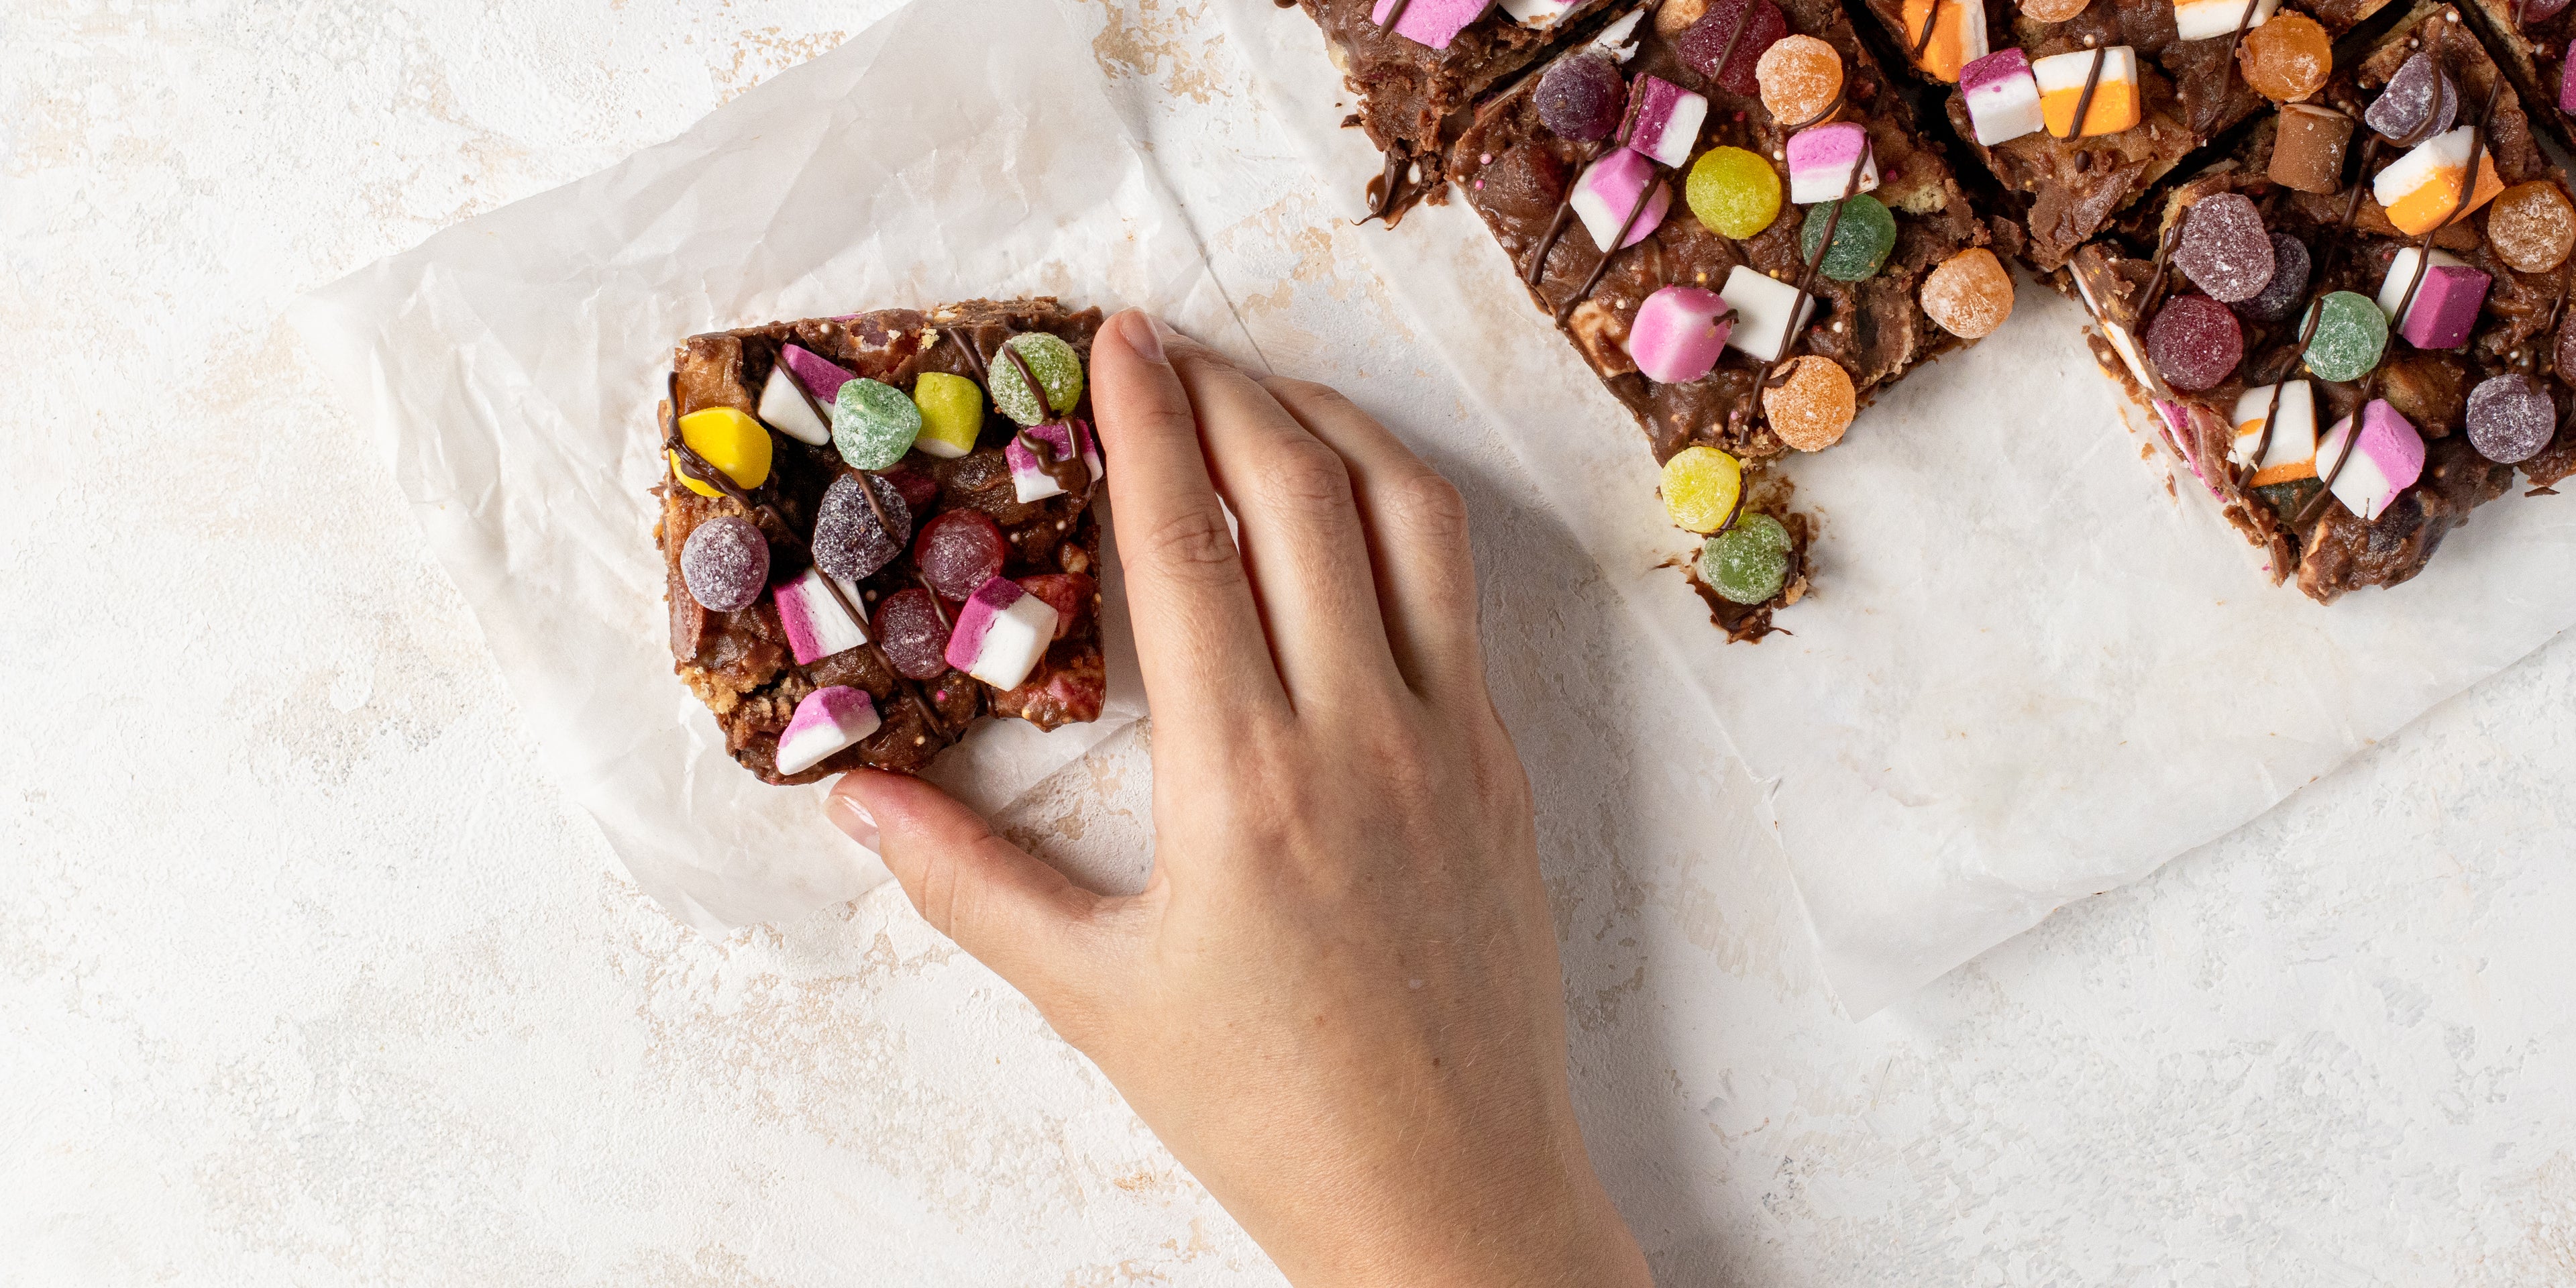 Top view of Sweetie Rocky Road lay on baking paper, with a slice cut out, and a hand reaching for a slice.